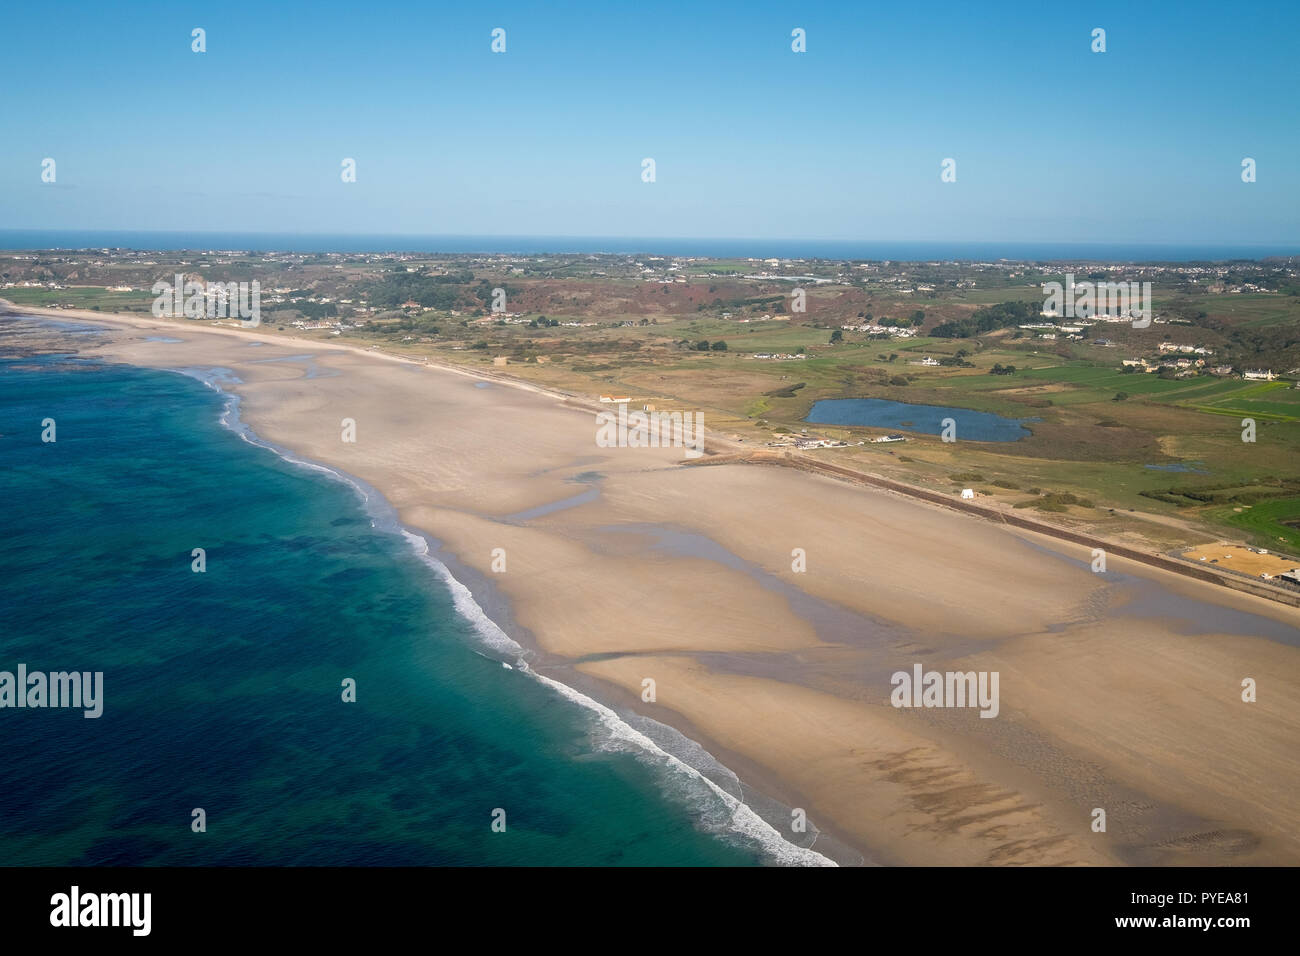 Aerial view of St Ouen's Beach in Jersey, The Channel Islands Stock Photo